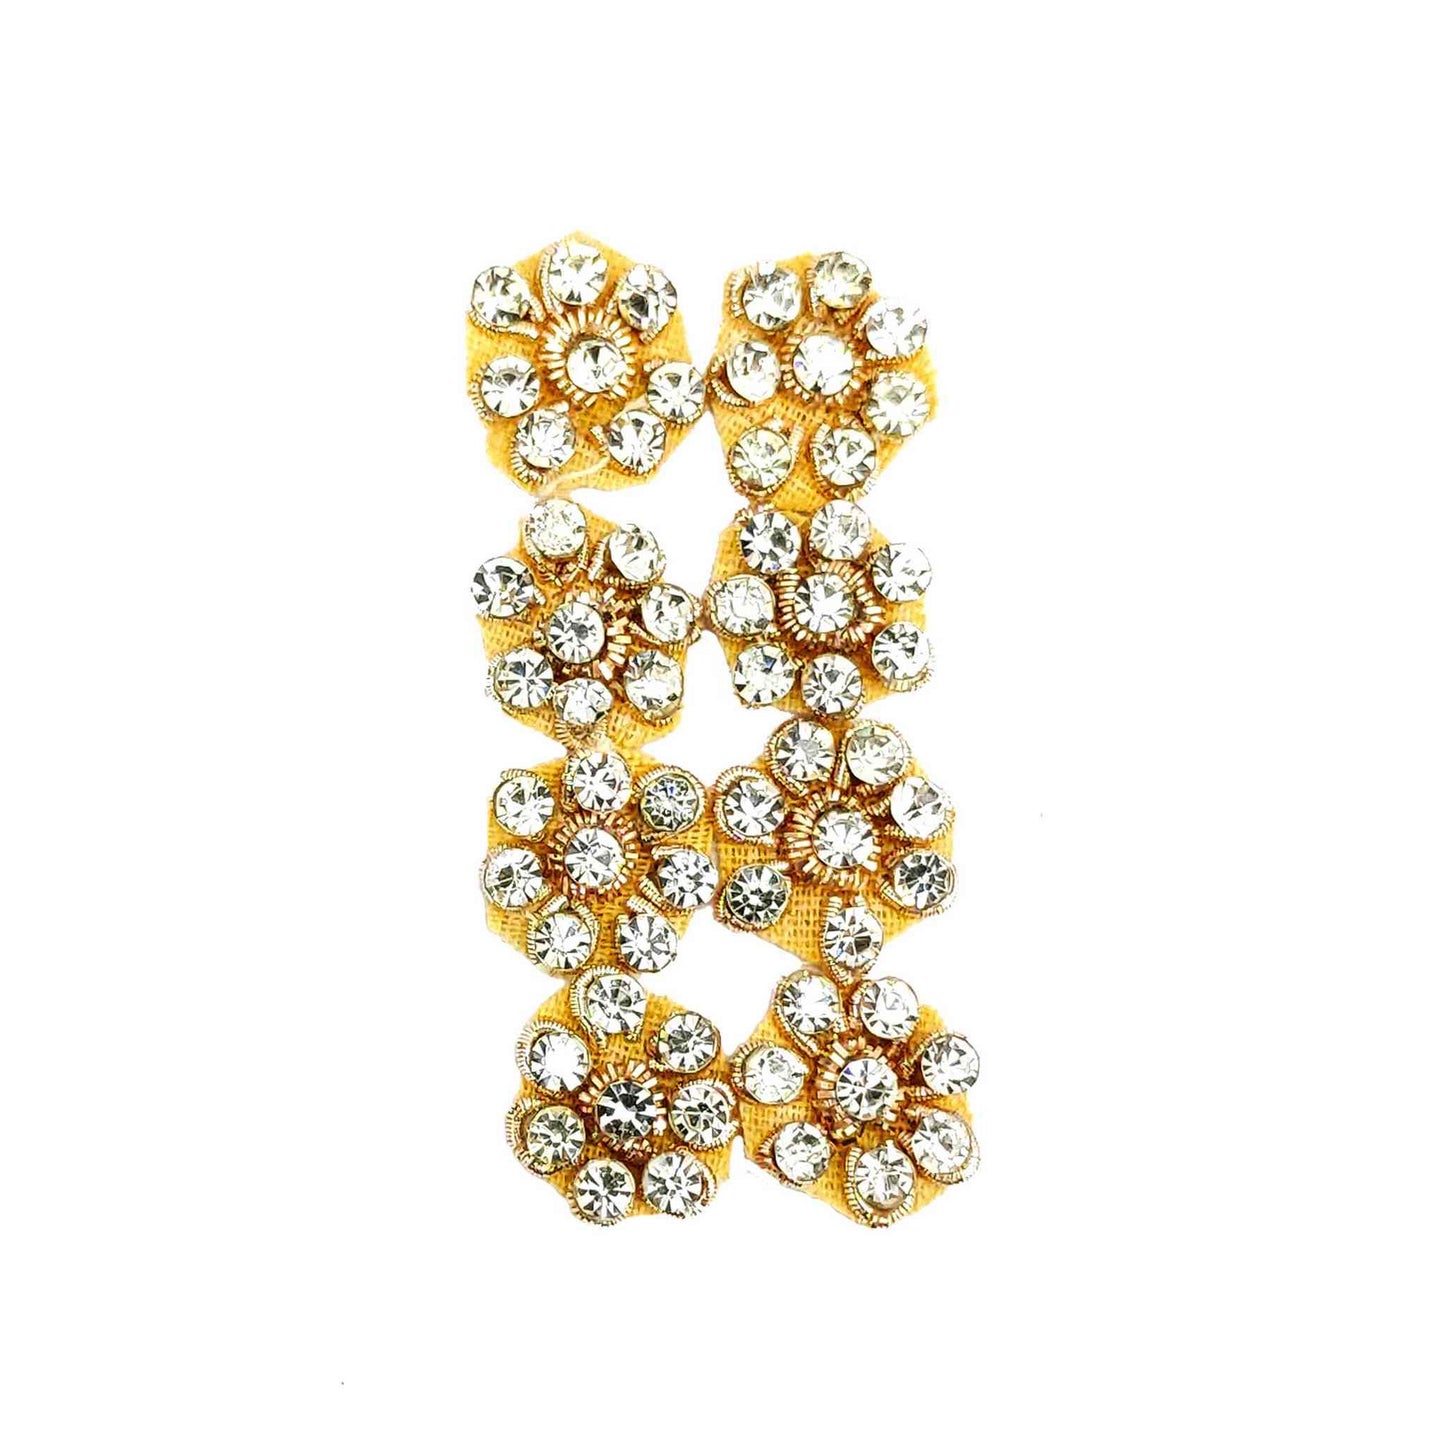 Indian Petals Rhinestone Studded Buti for DIY Craft, Trousseau Packing or Decoration (Bunch of 12) - Design 219 - Indian Petals